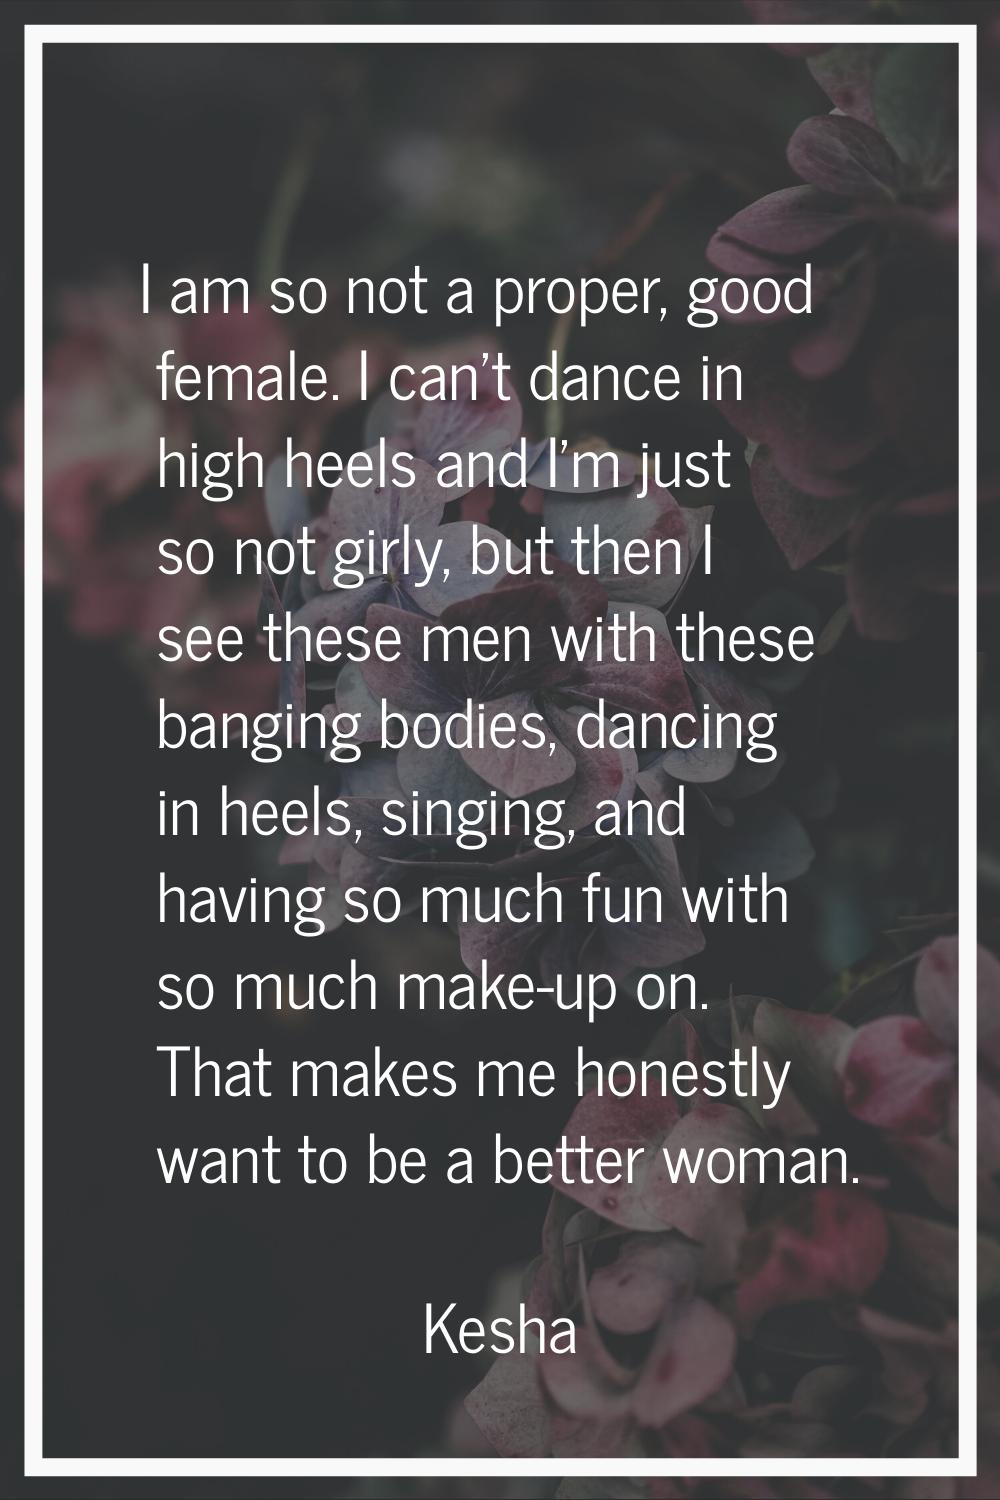 I am so not a proper, good female. I can't dance in high heels and I'm just so not girly, but then 